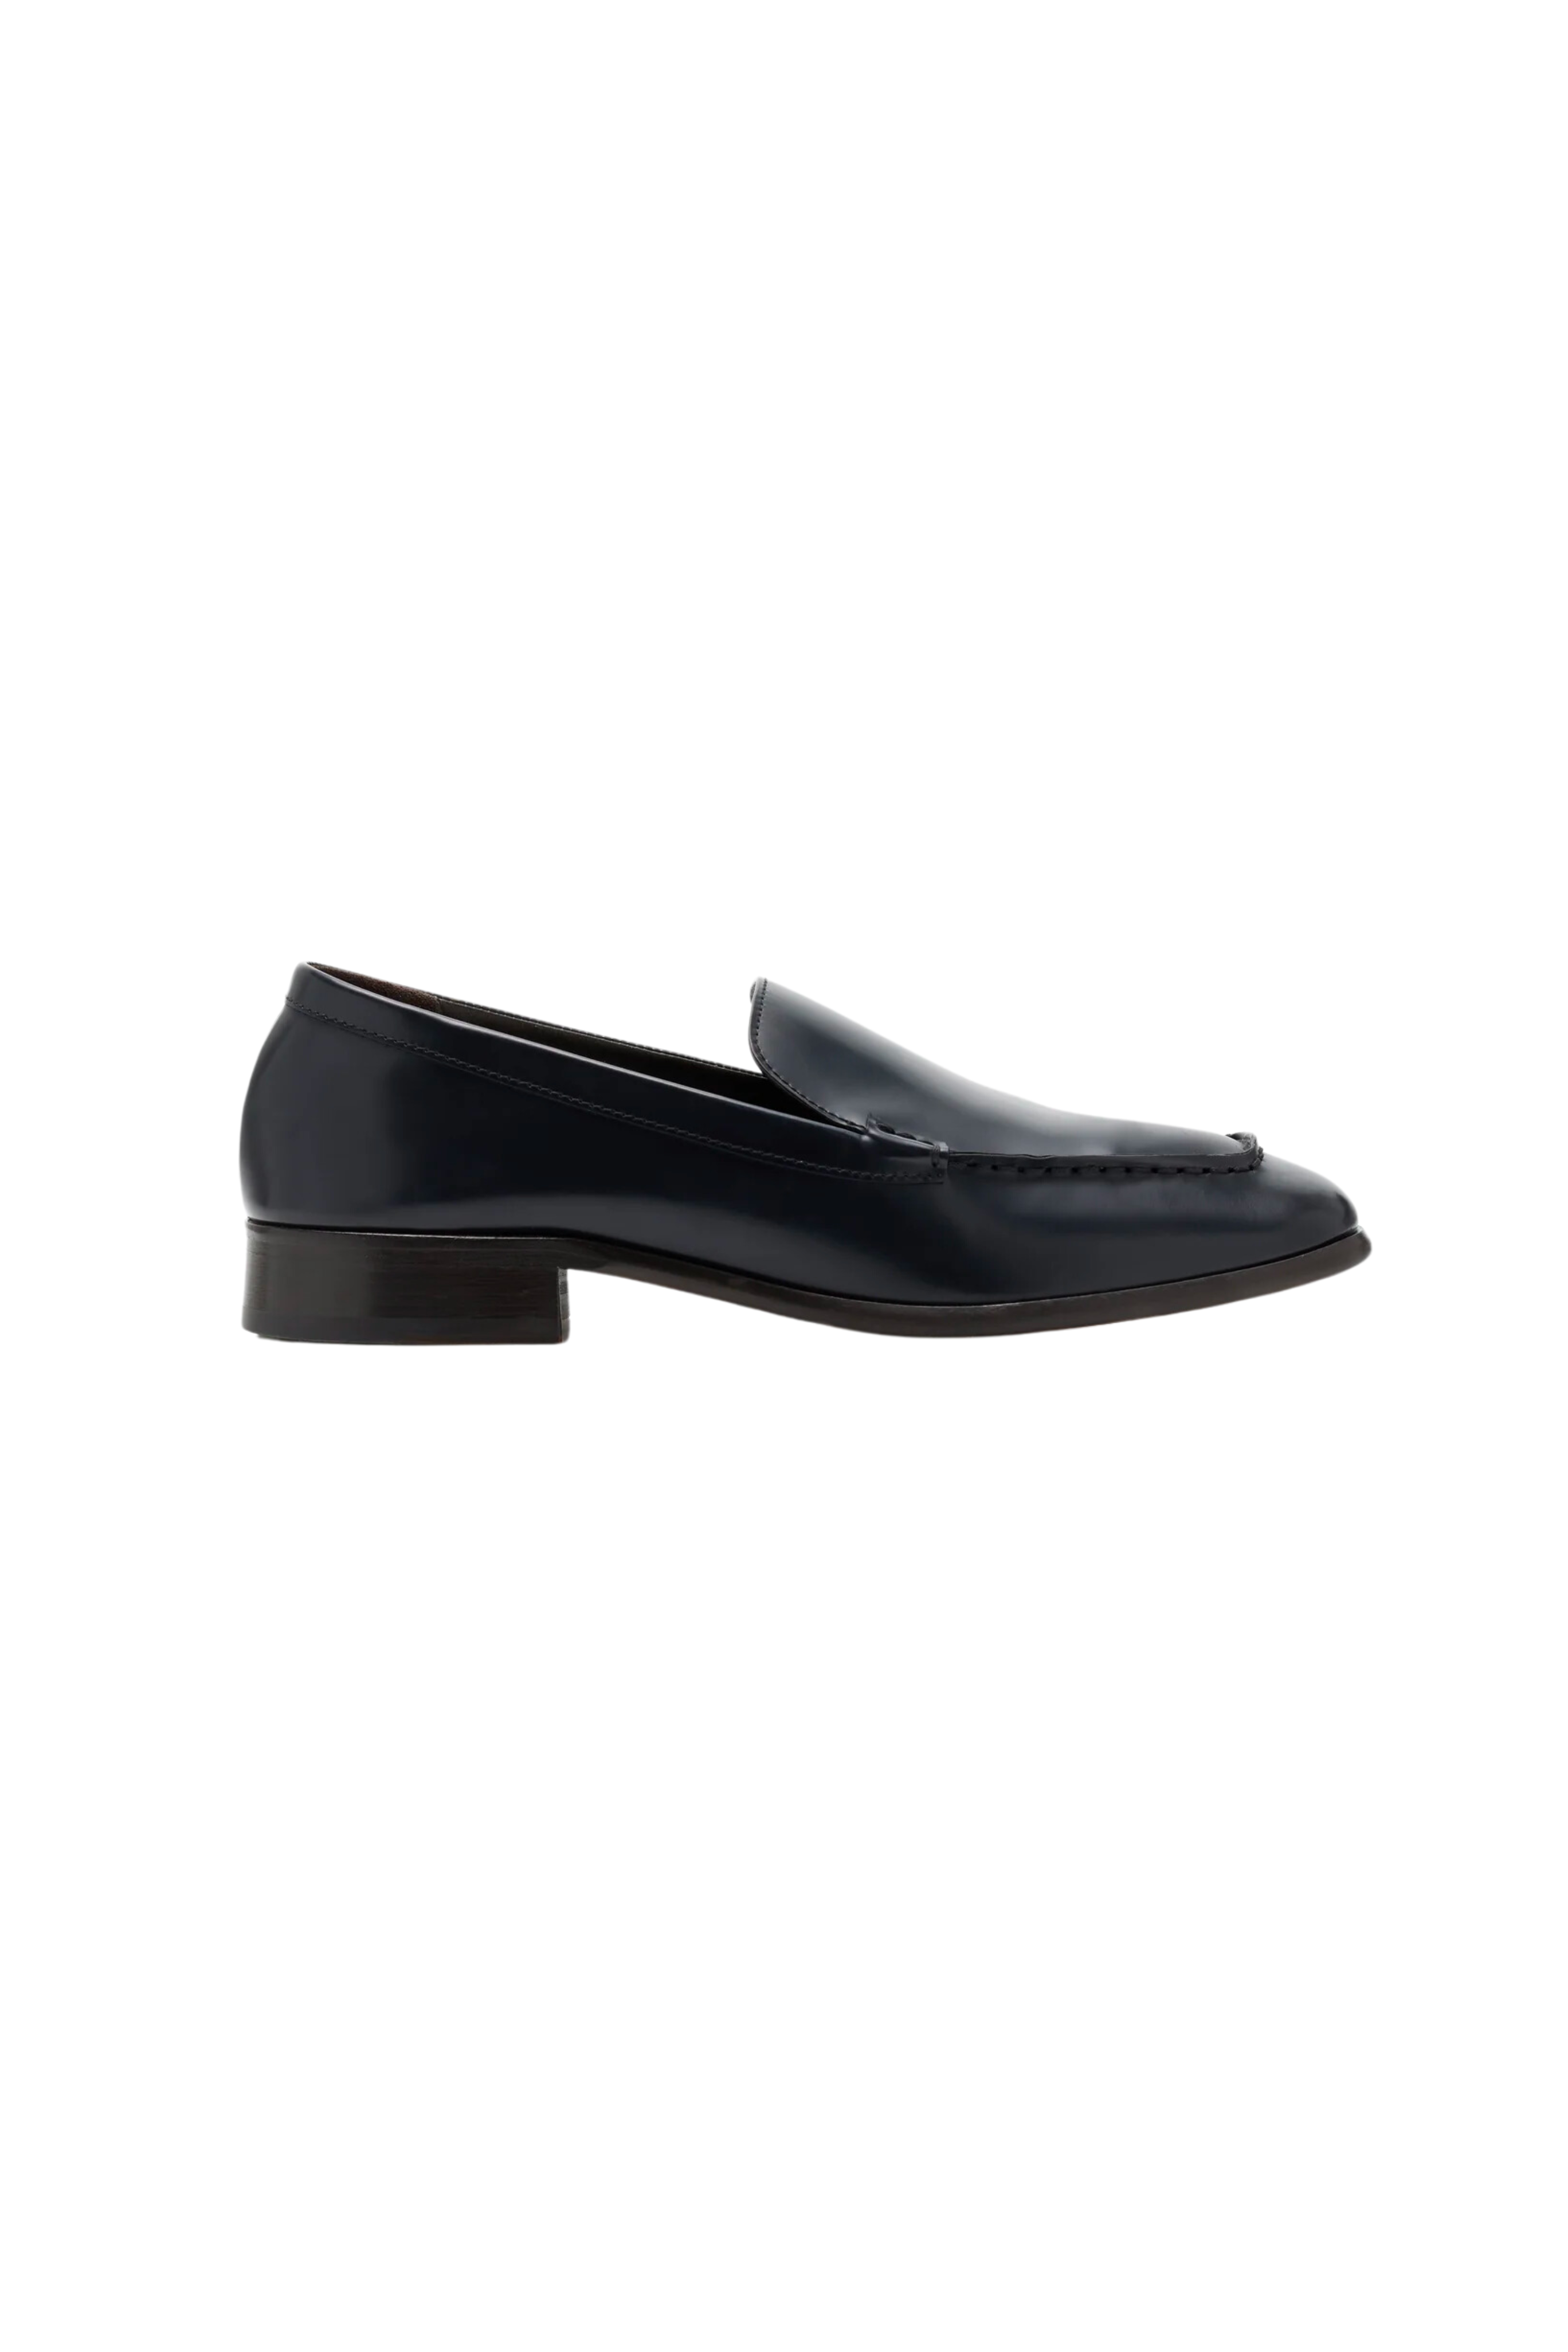 THE ROW Mensy Loafers